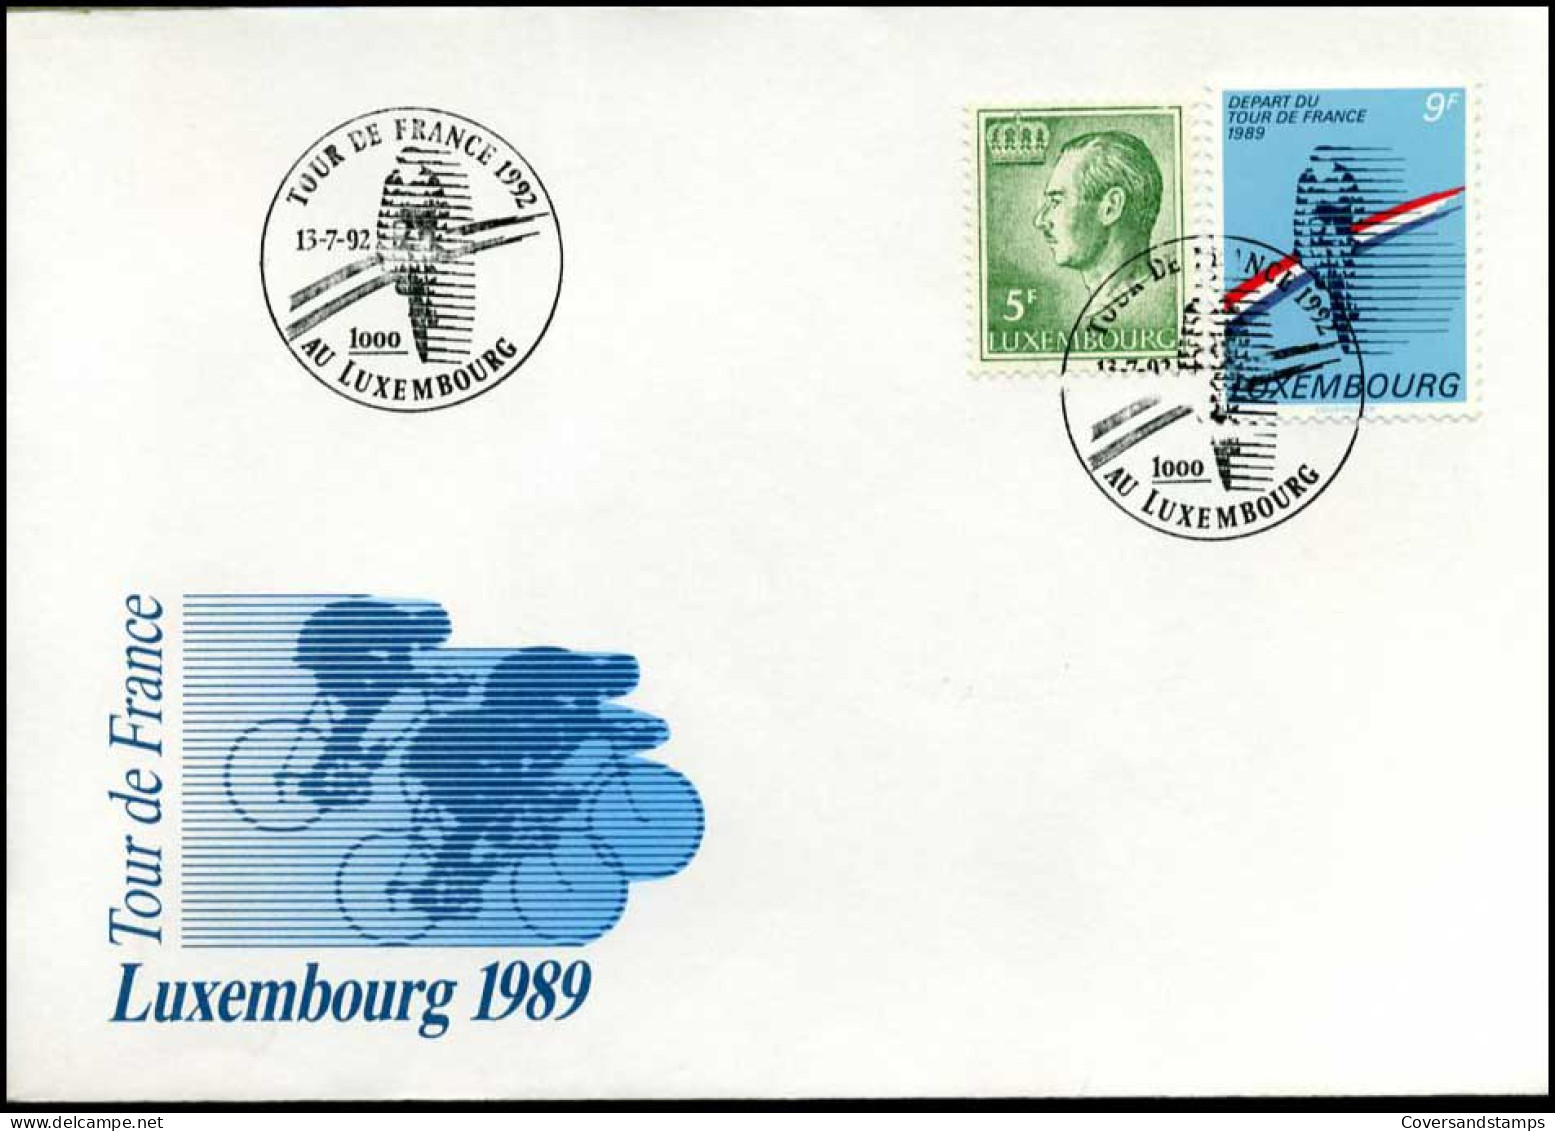 Luxembourg - FDC - Tour De France - FDC